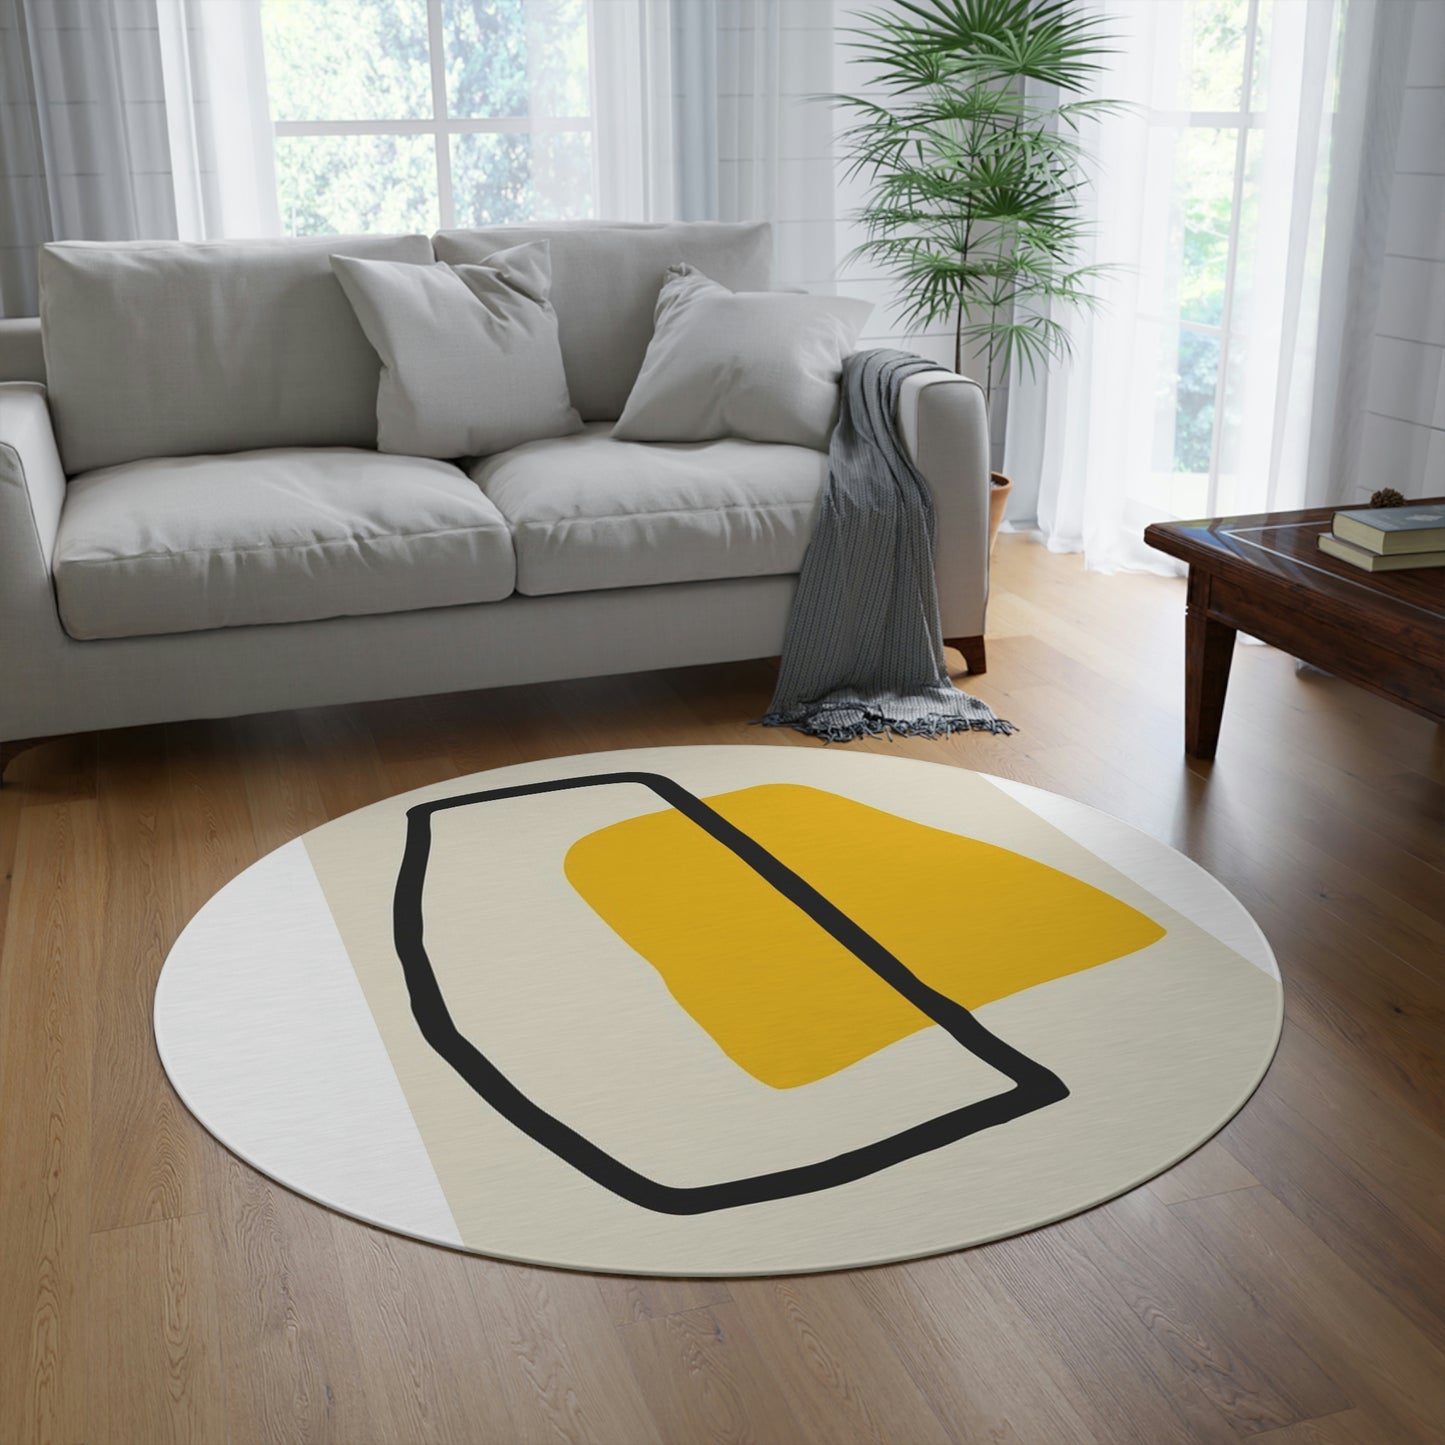 Abstract Round Rug